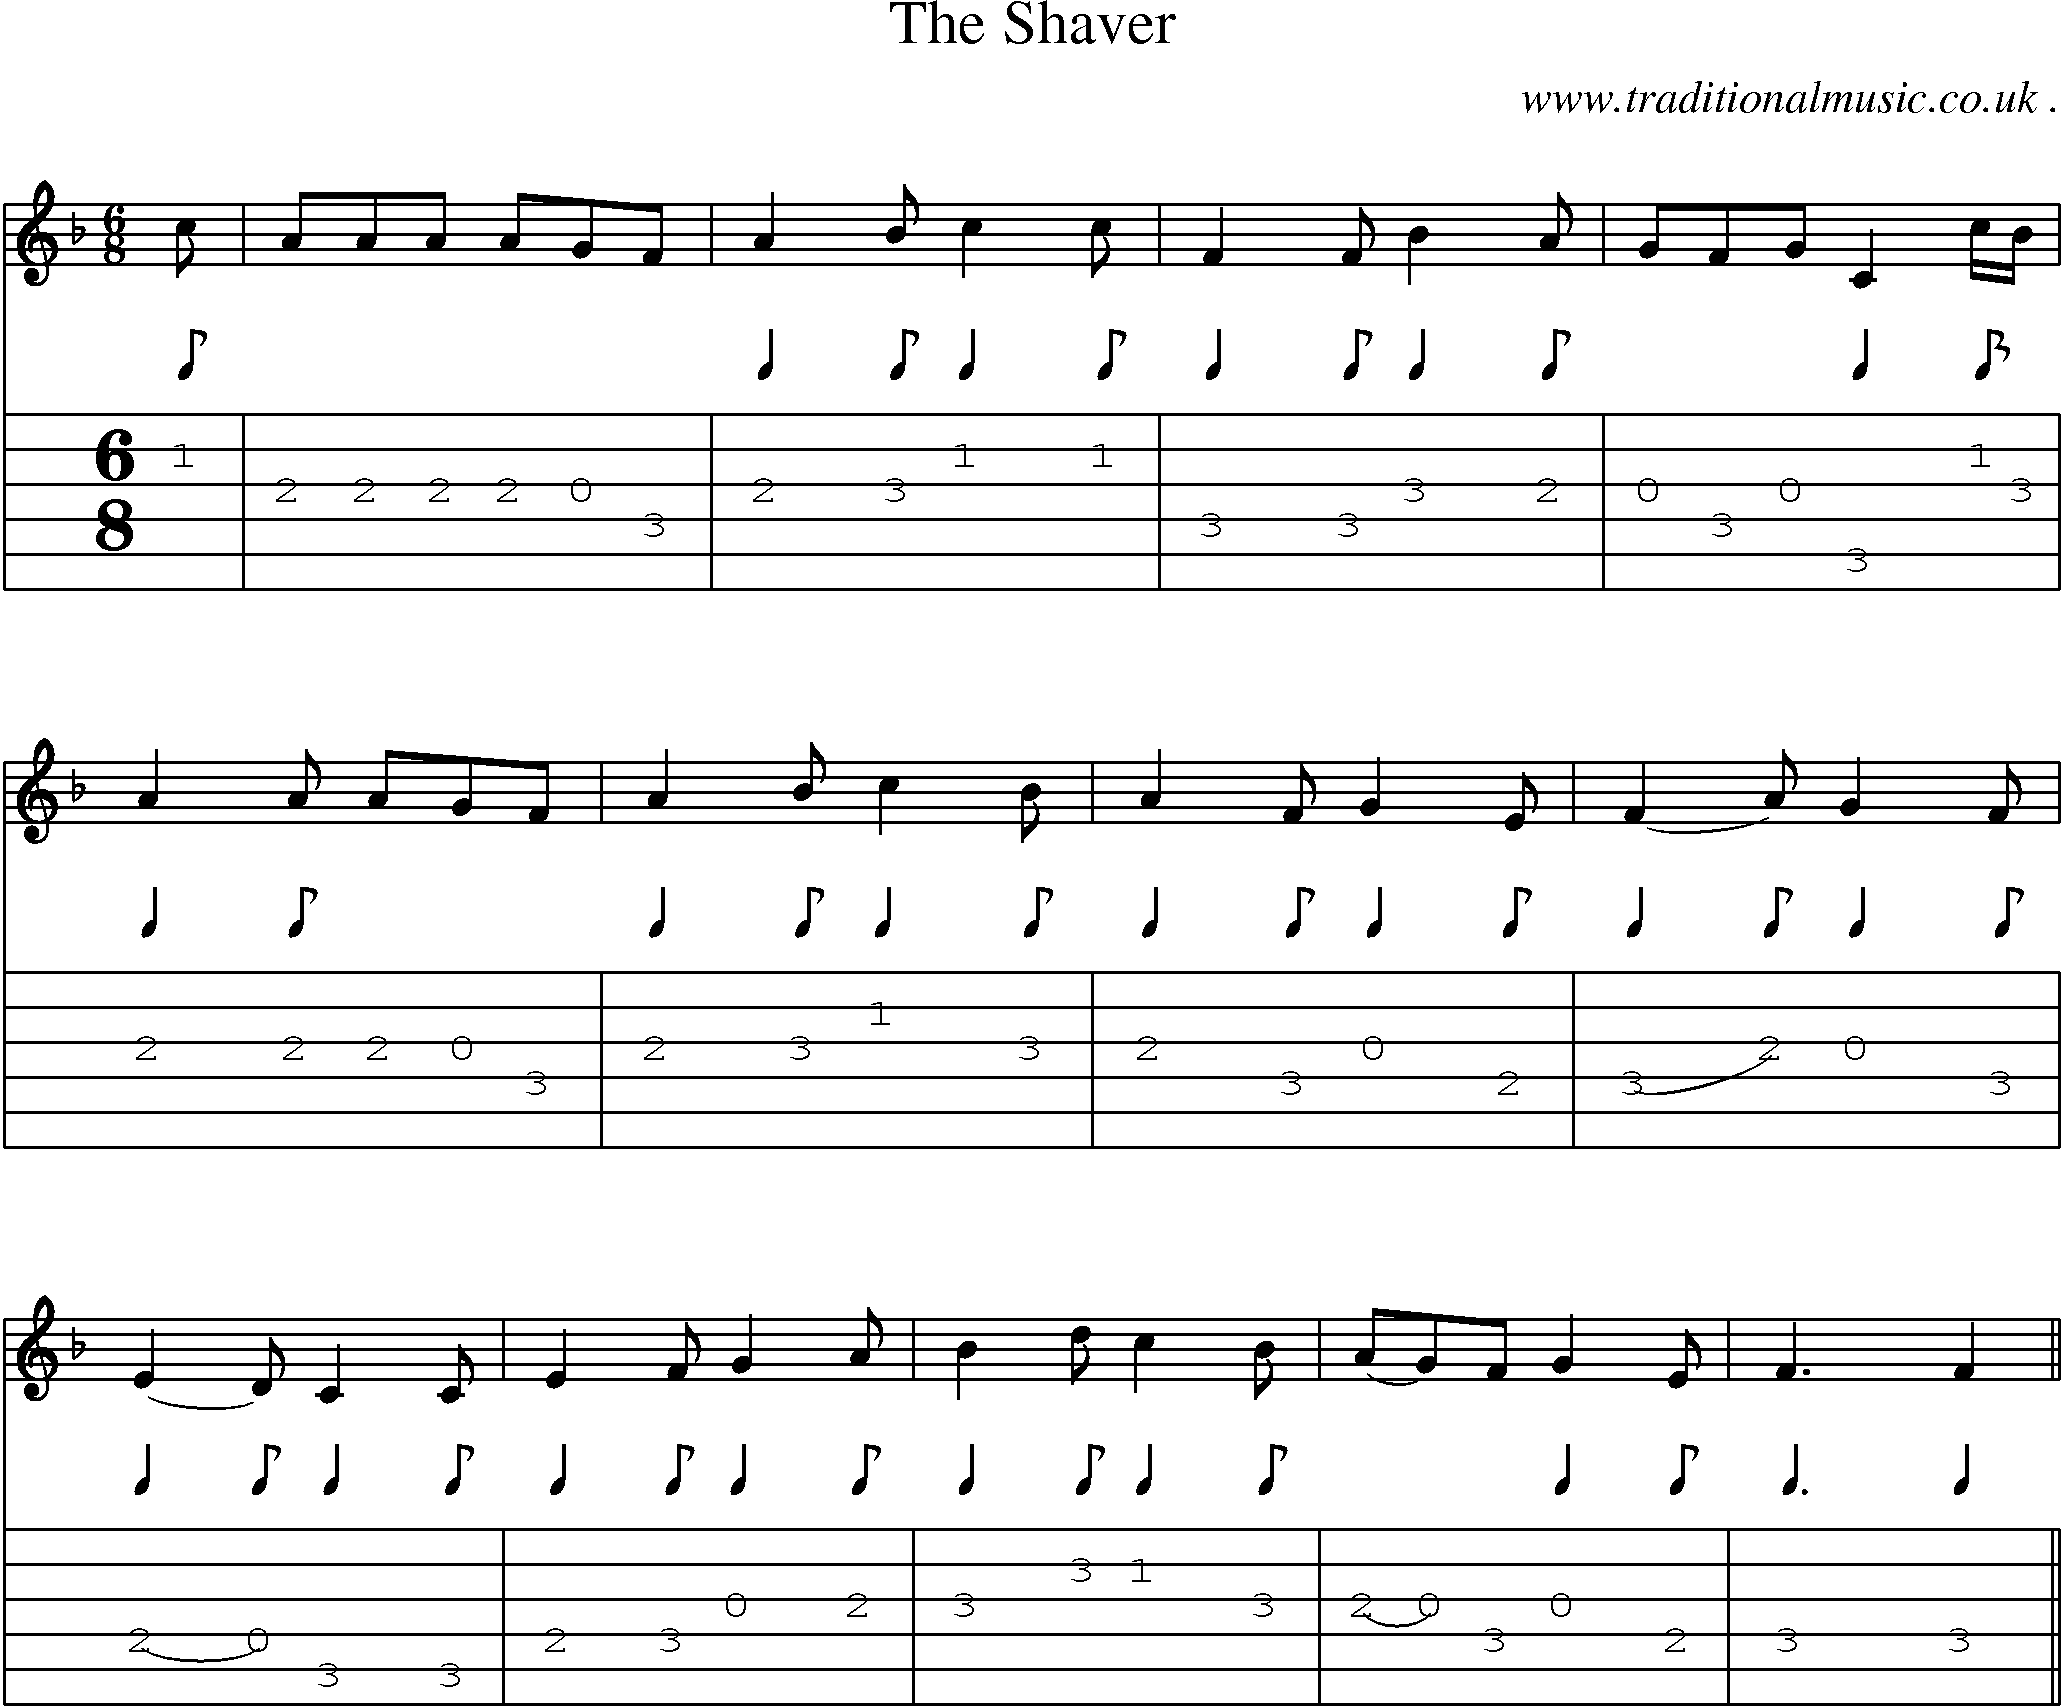 Sheet-Music and Guitar Tabs for The Shaver